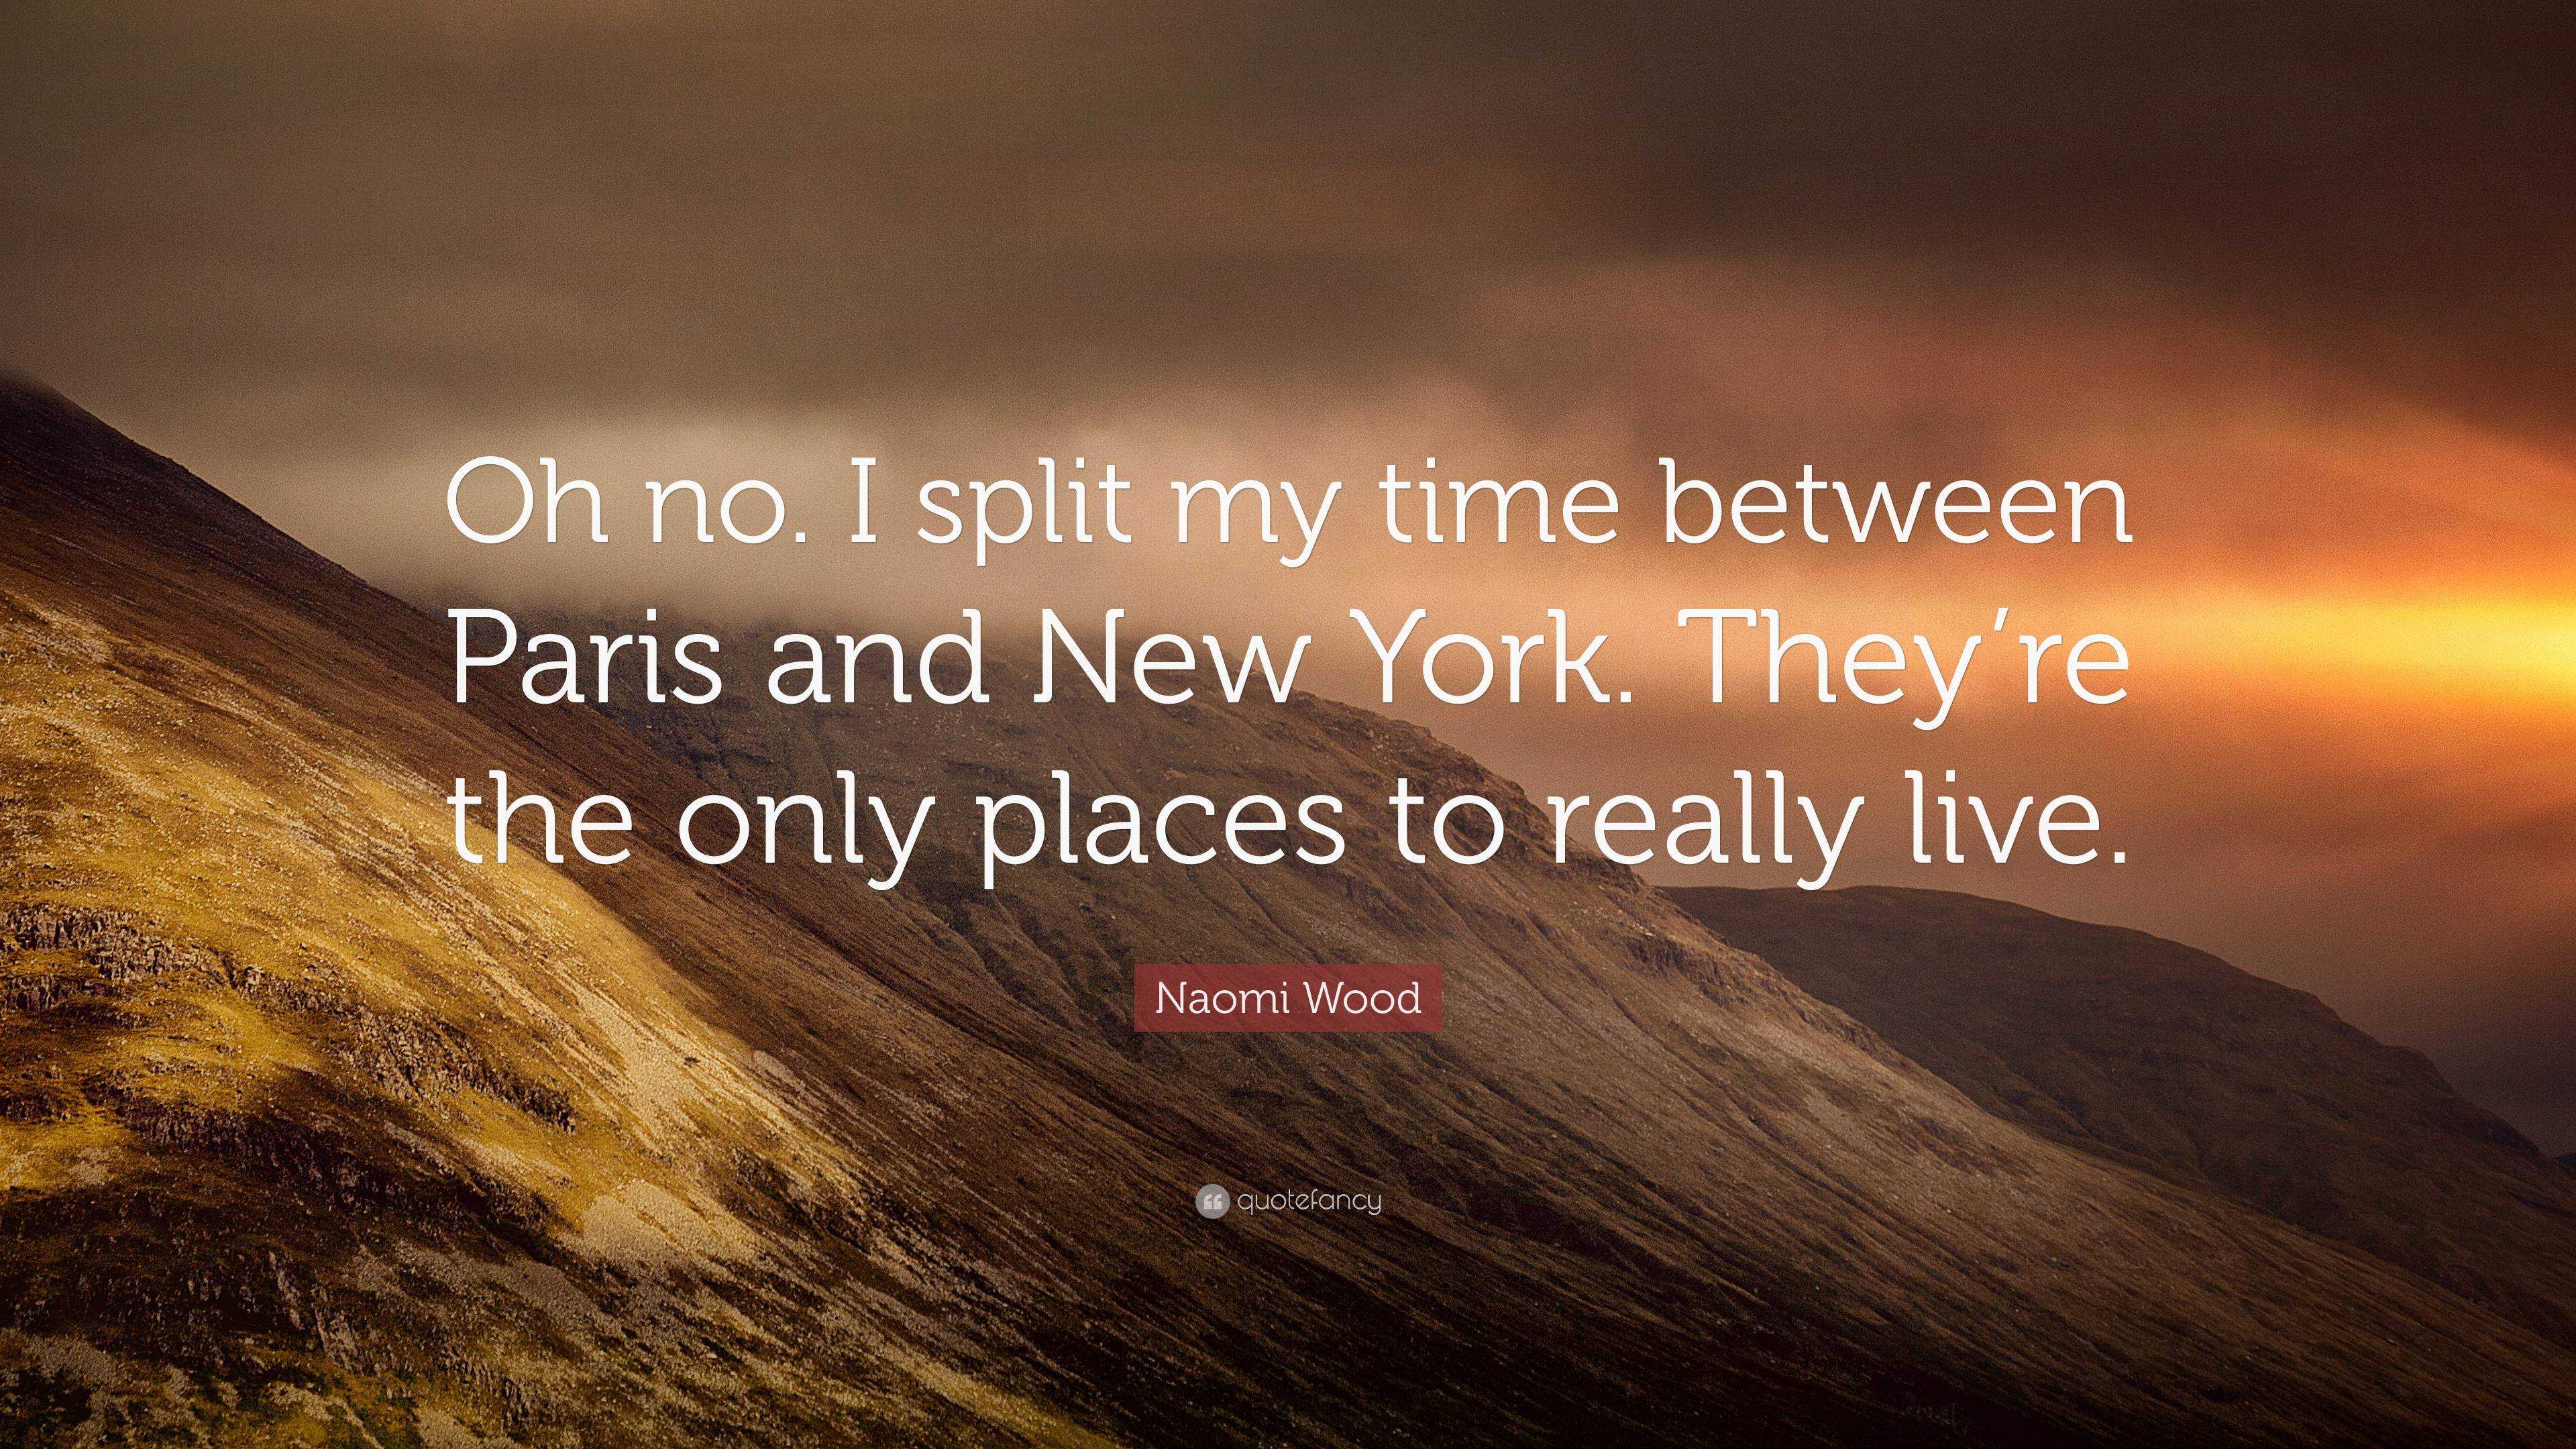 Naomi Wood Quote: “Oh no. I split my time between Paris and New York ...